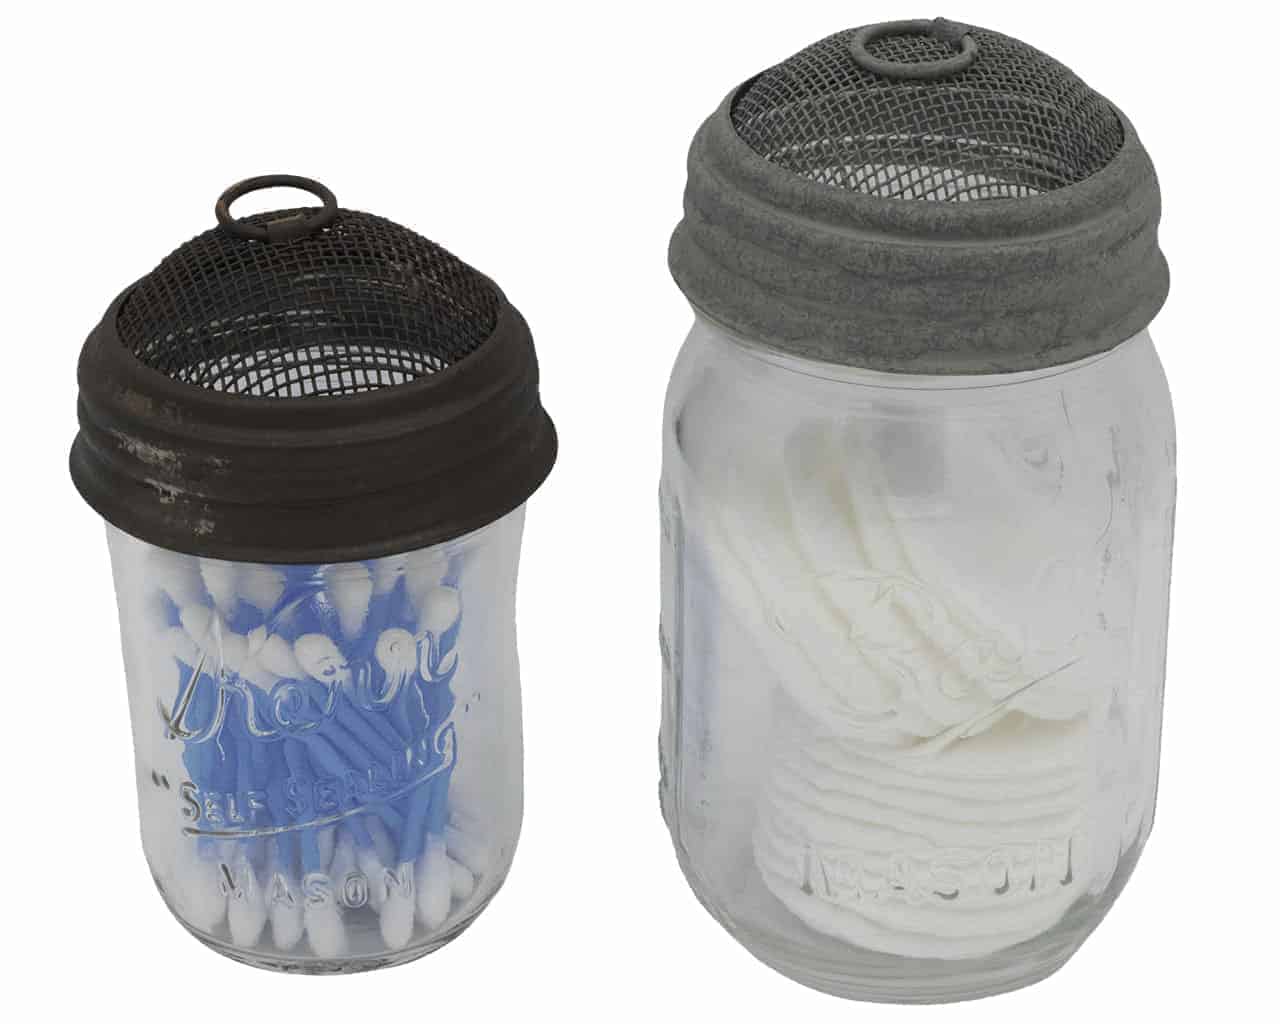 colonial-tin-works-screen-dome-lid-regular-mouth-ball-kerr-mason-jar-brown-barn-roof-cotton-swabs